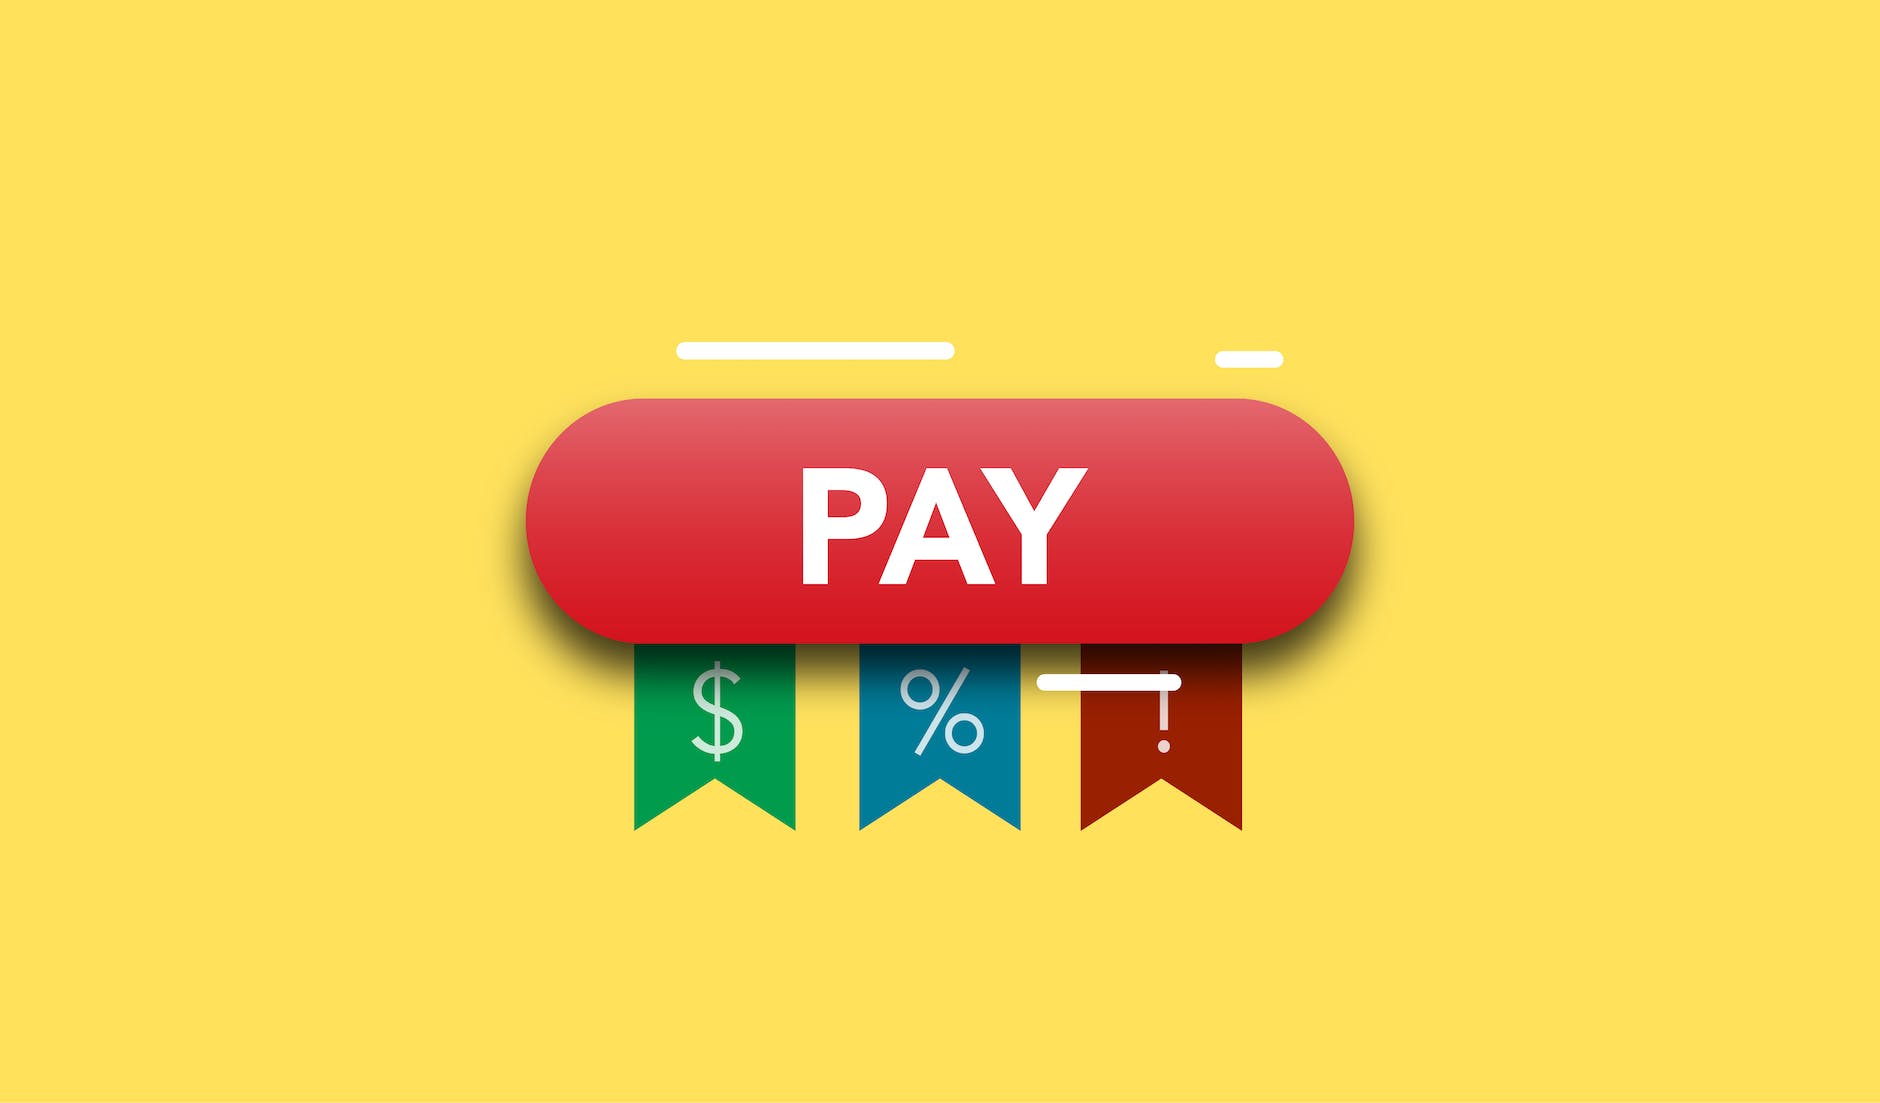 illustration of payment concept for percents currency and information